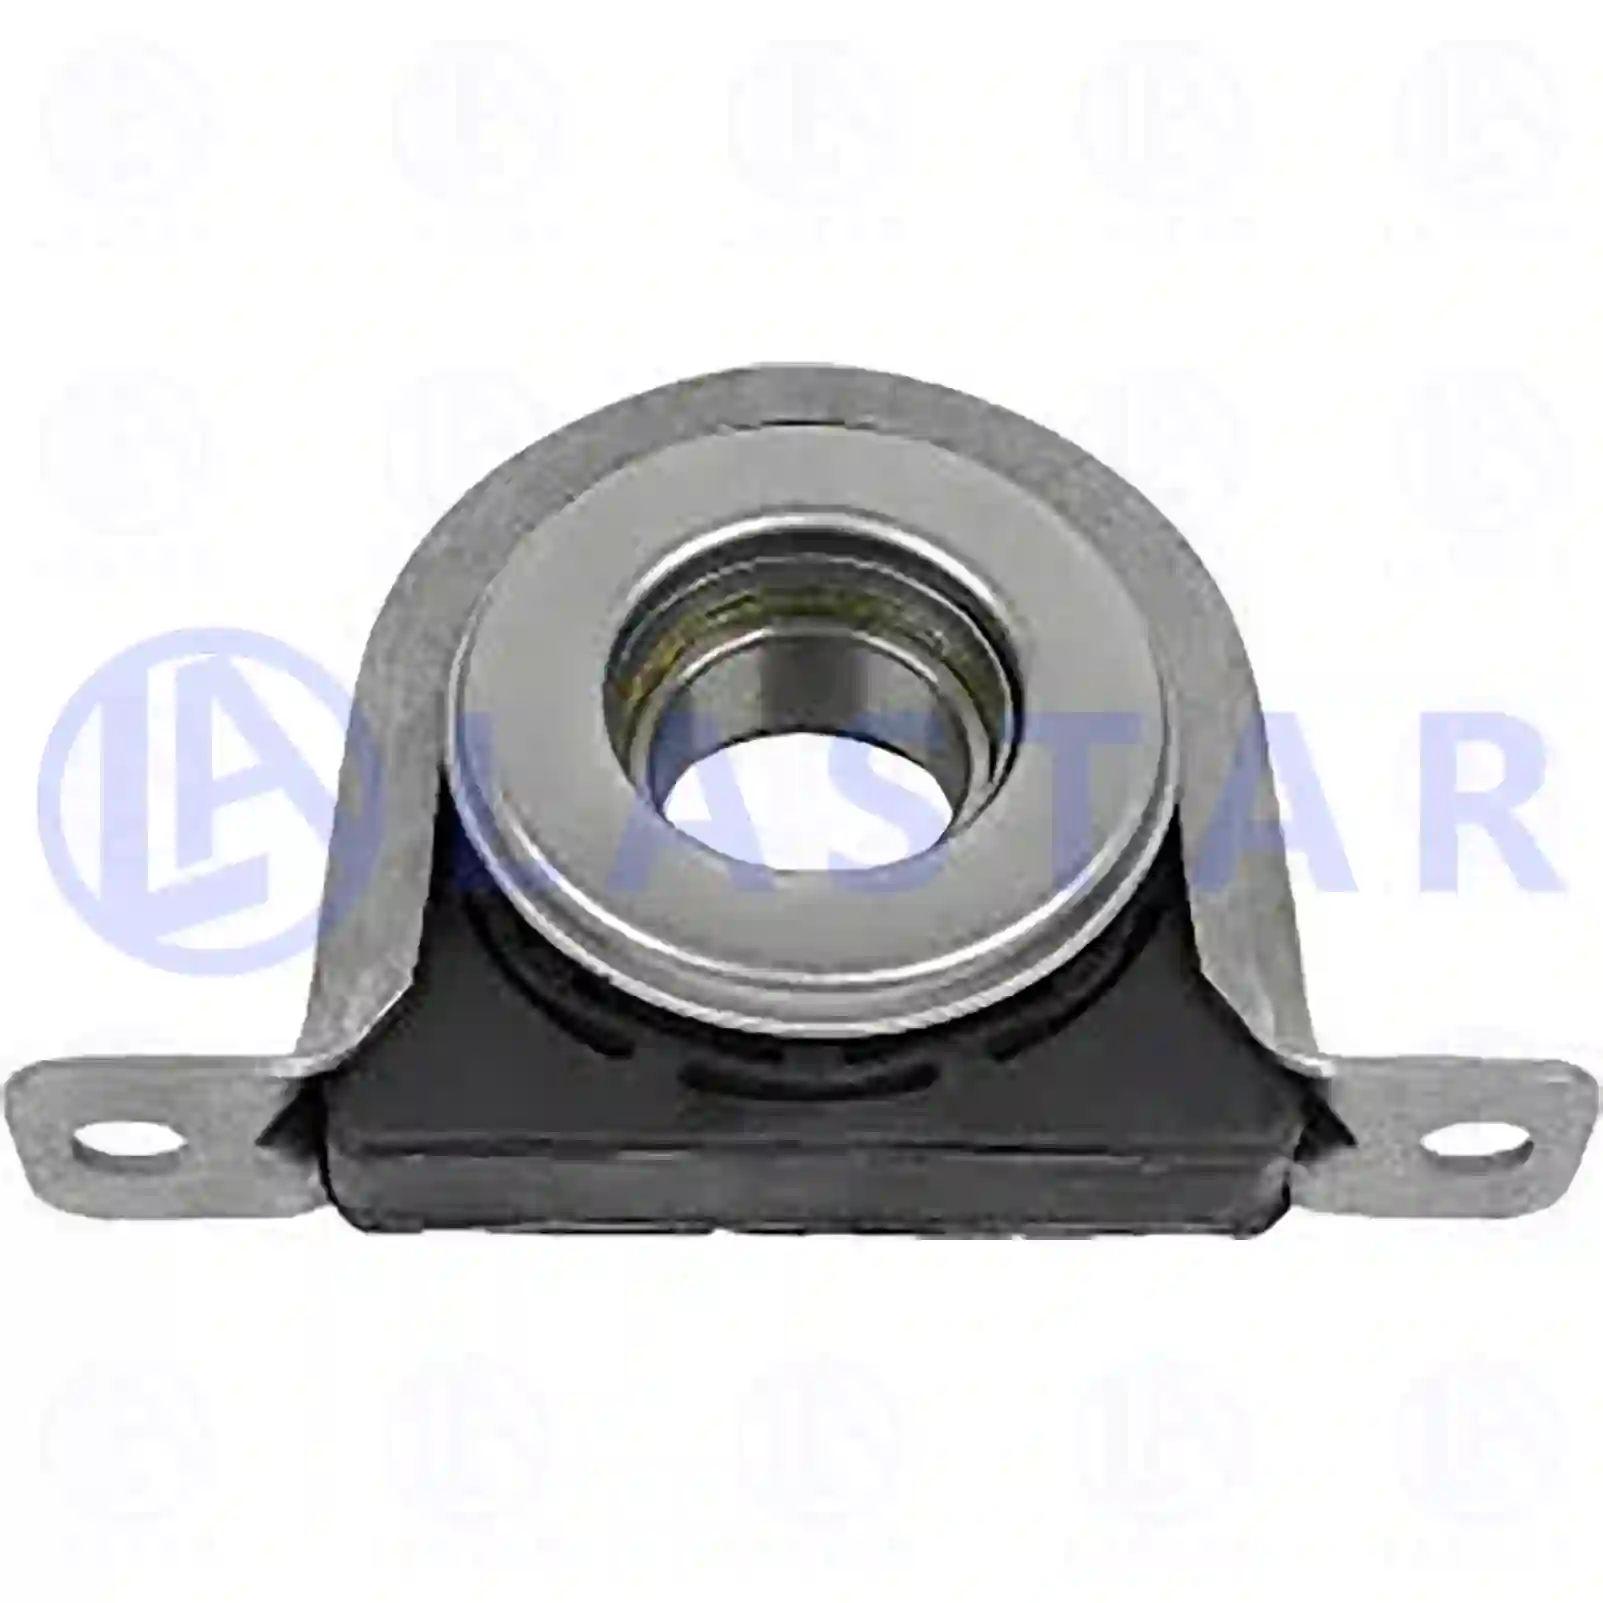 Support Bearing Center bearing, la no: 77734358 ,  oem no:42530546, 93158202, ZG02509-0008 Lastar Spare Part | Truck Spare Parts, Auotomotive Spare Parts